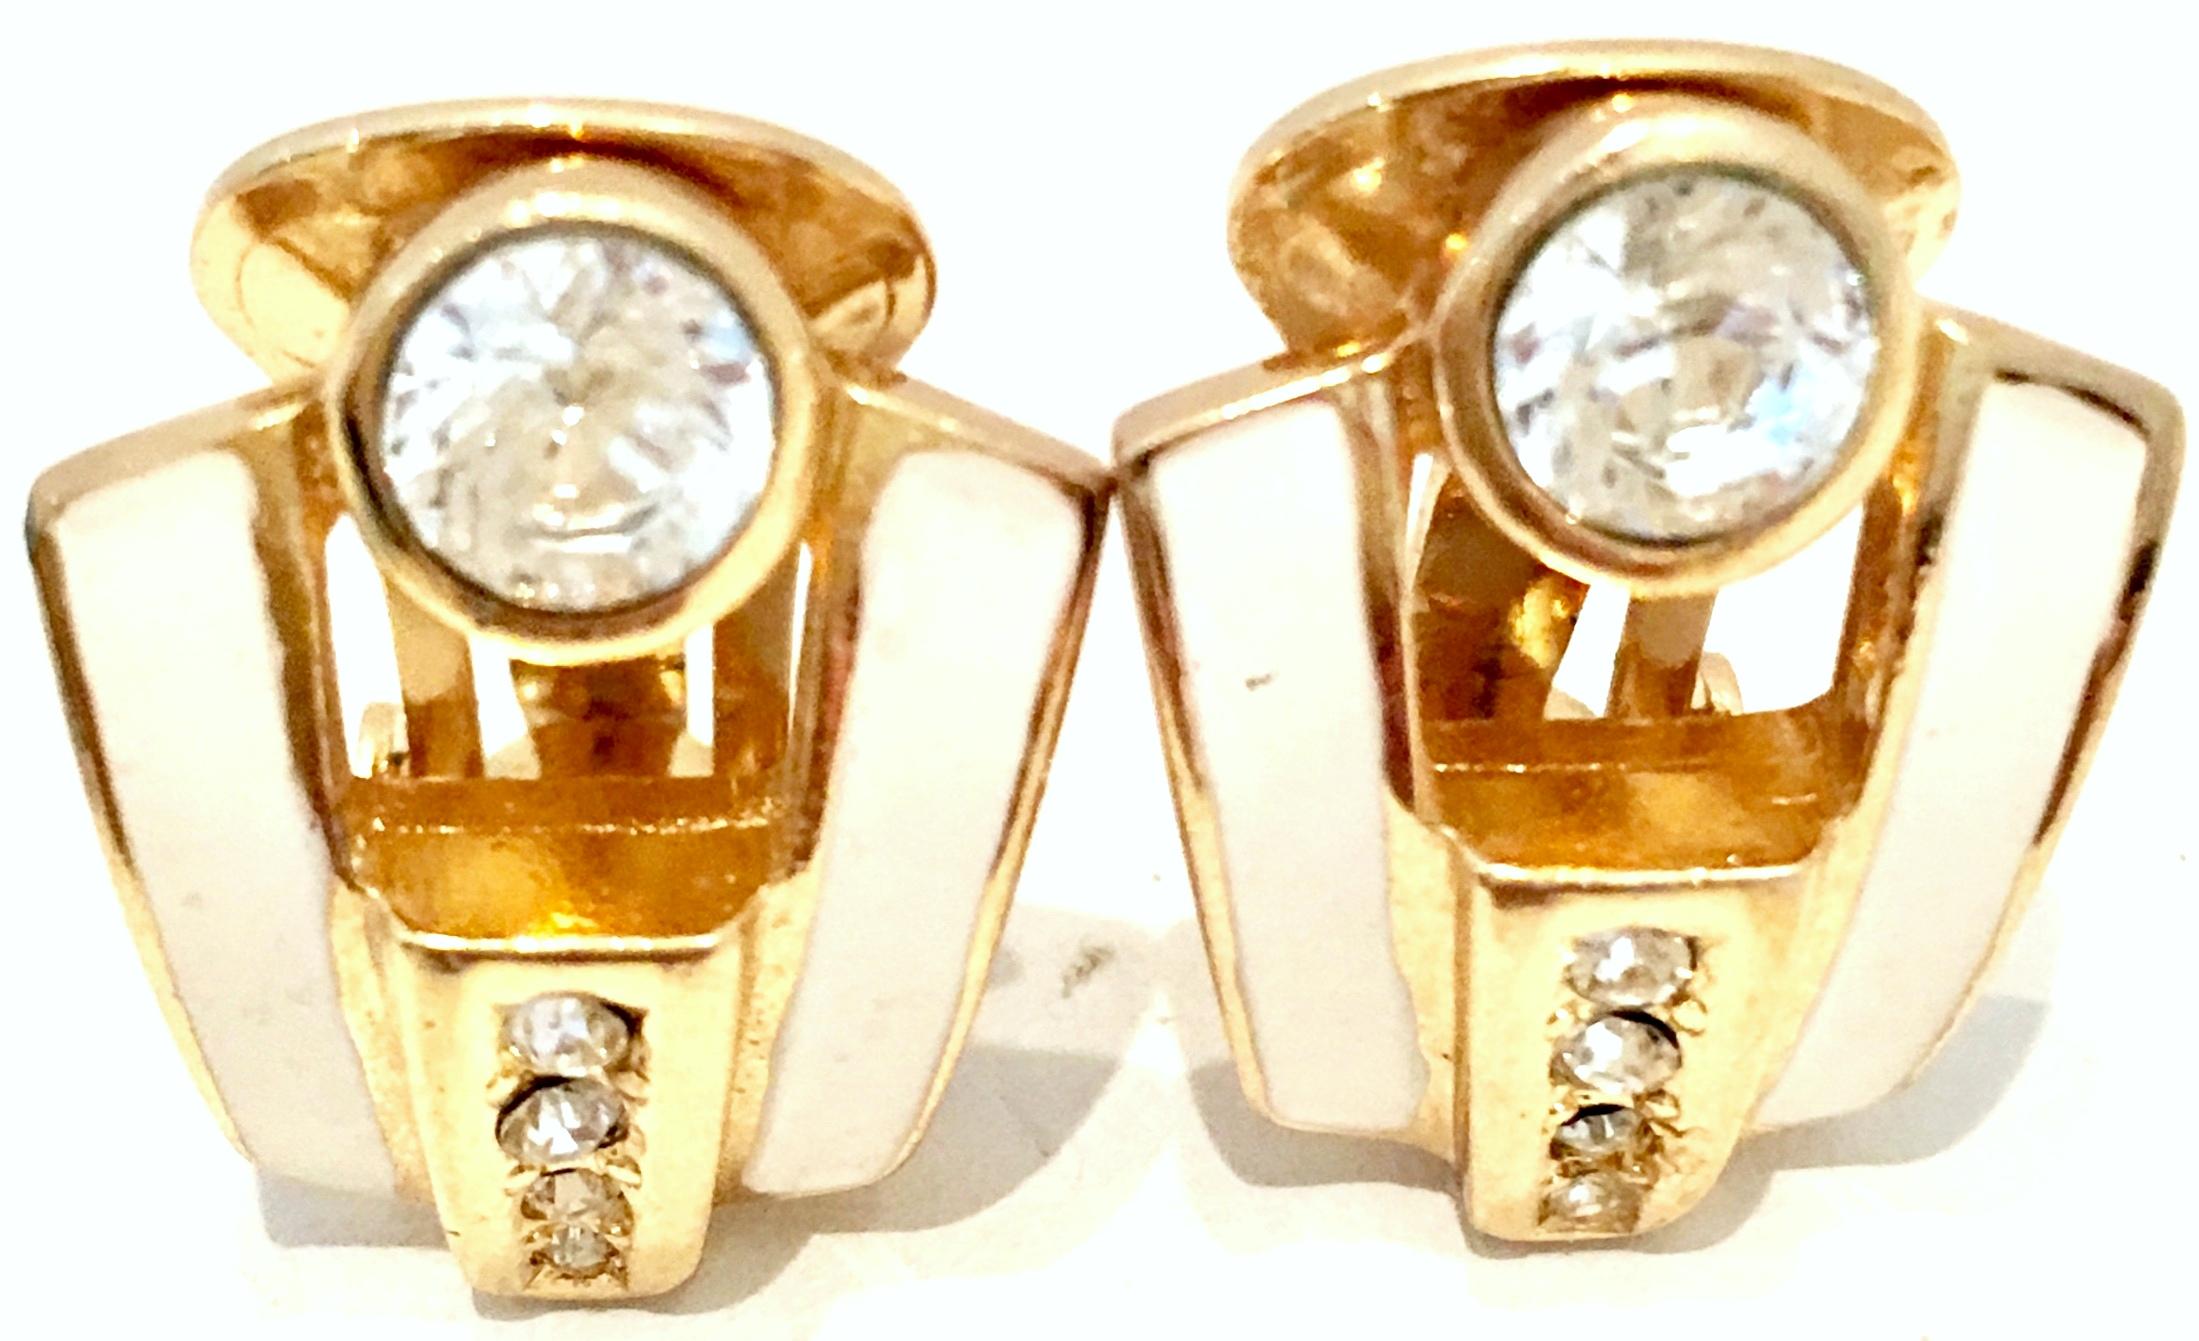 20th Century Pair Of Gold Plate, Enamel & Swarovksi Crystal Earrings By, Christian Dior. These clip style earrings feature gold plate with ivory enamel and brilliant cut and faceted colorless Swarovski crystal pave set stones. Each piece is signed